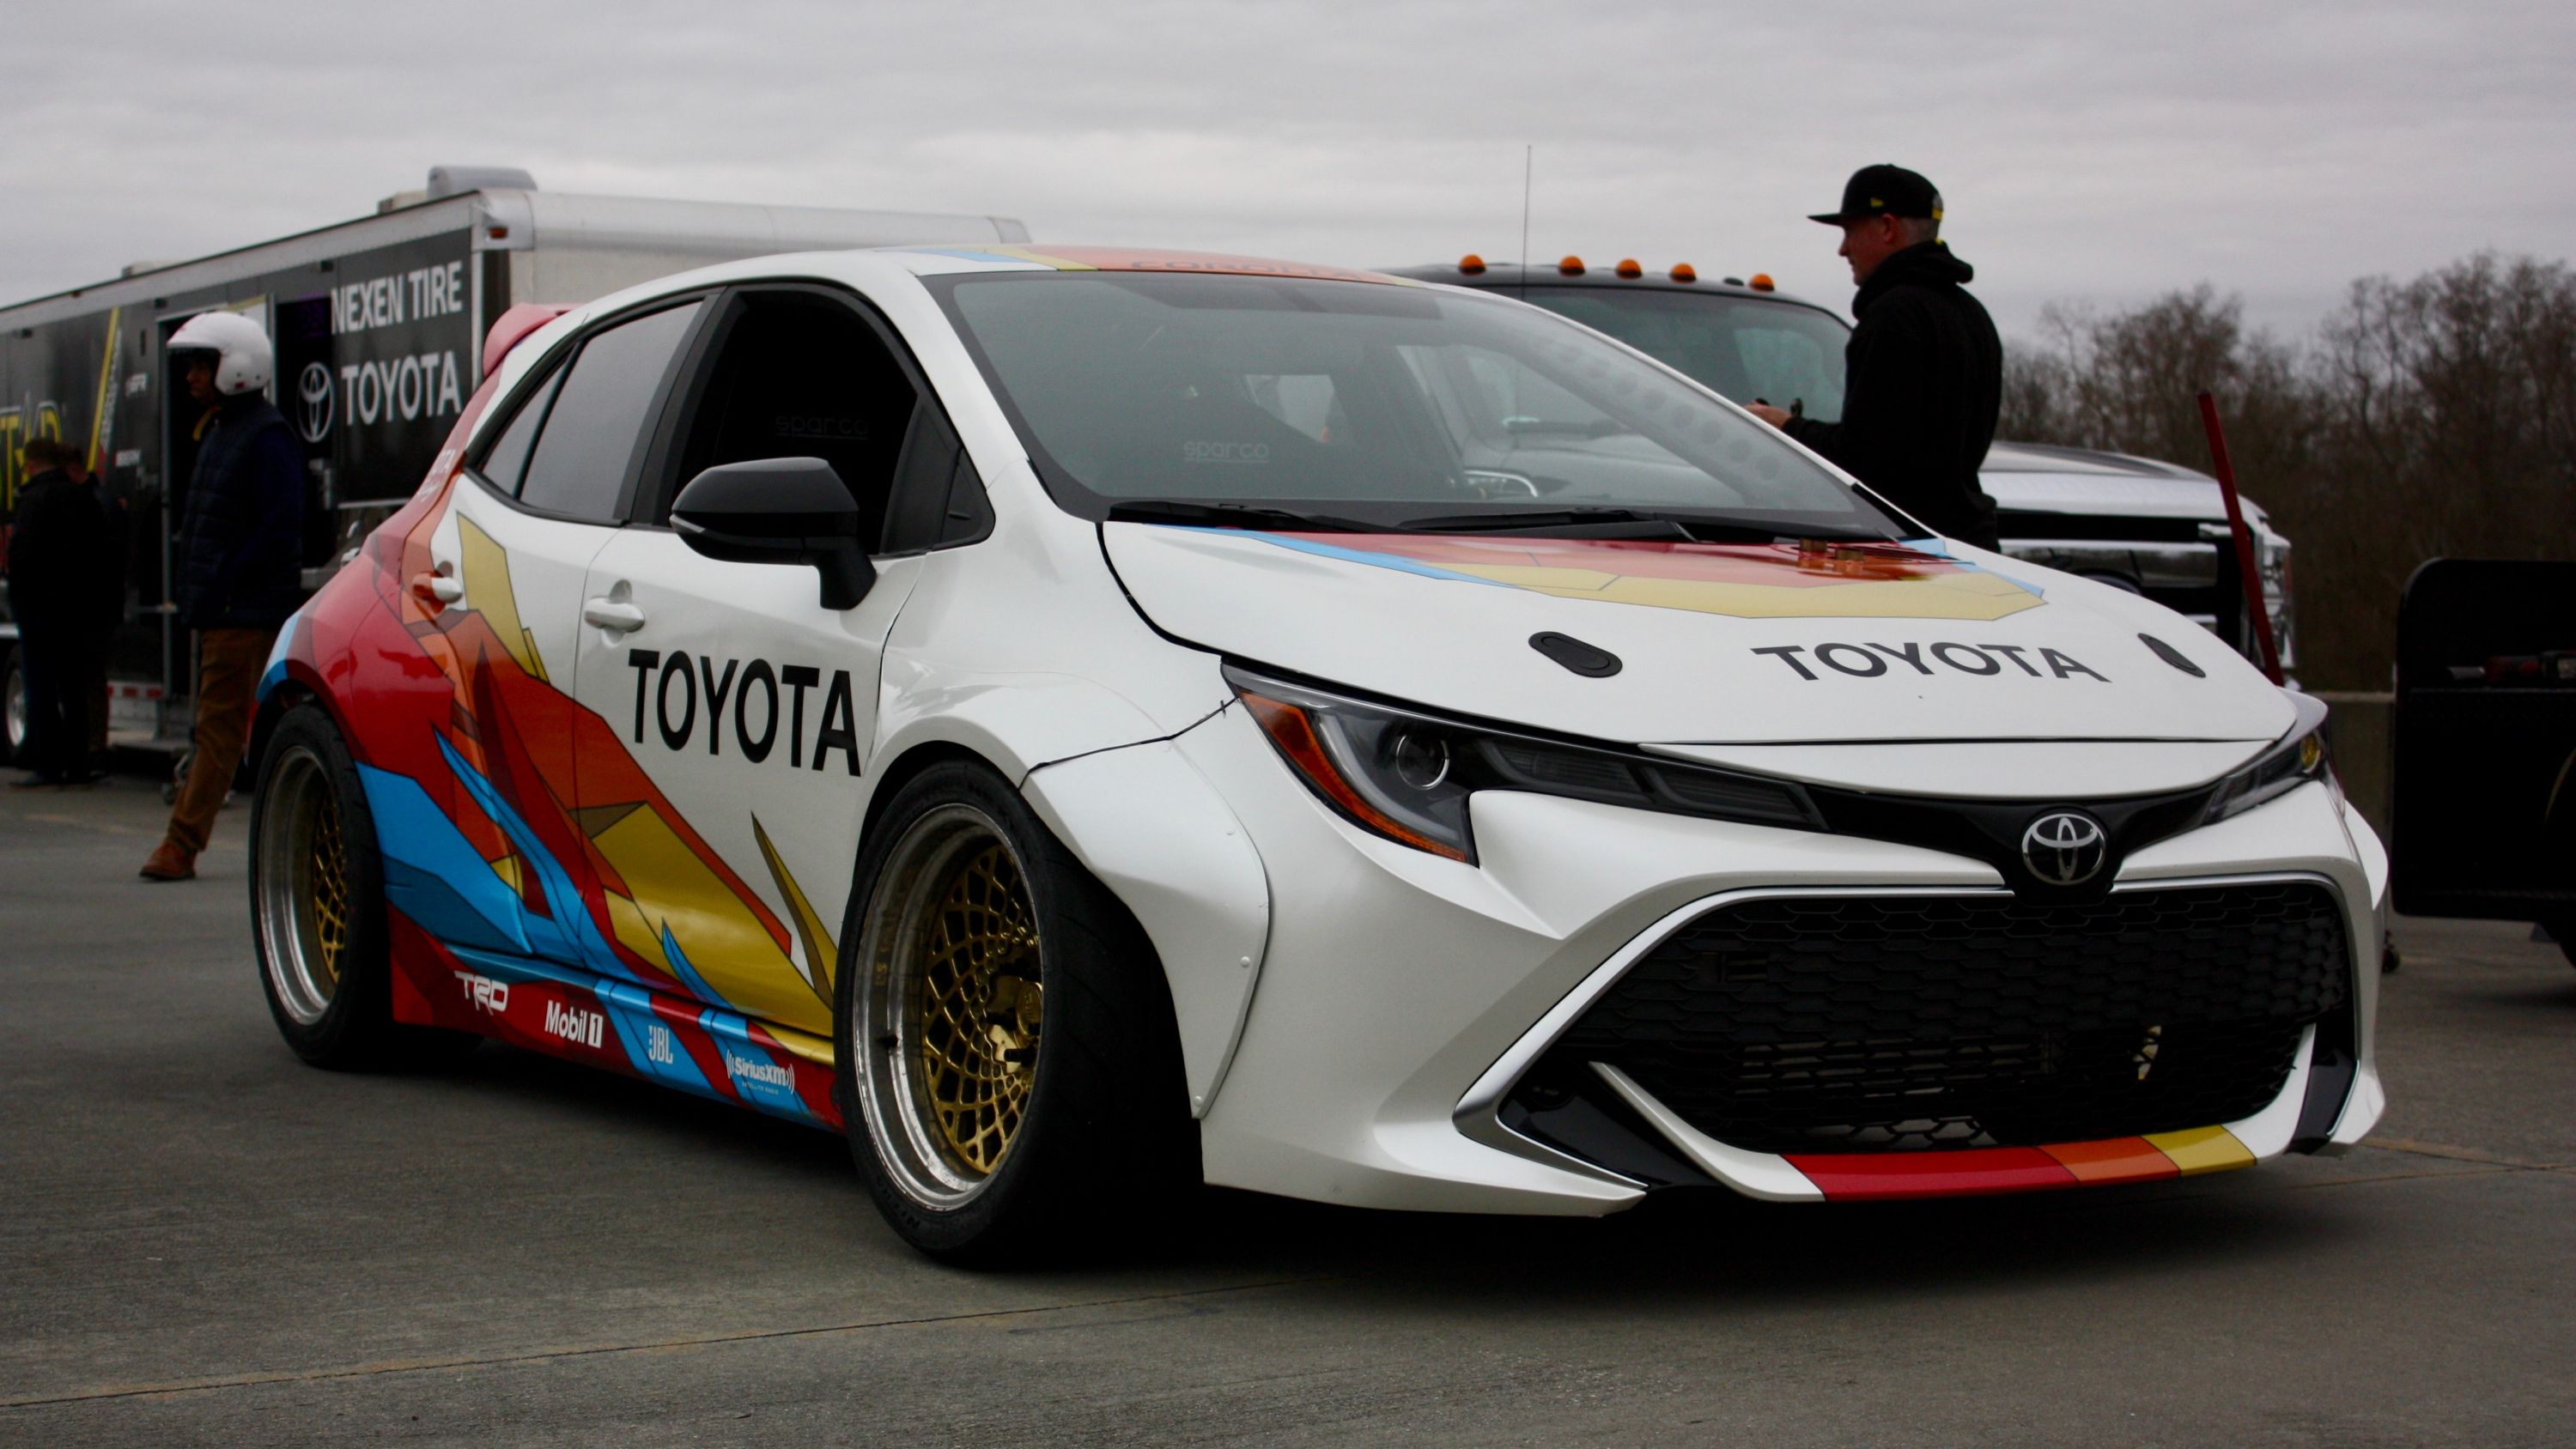 2019 I Took A Ride In The Papadakis Racing Toyota Corolla Hatch Drift Car And It Melted My Brain